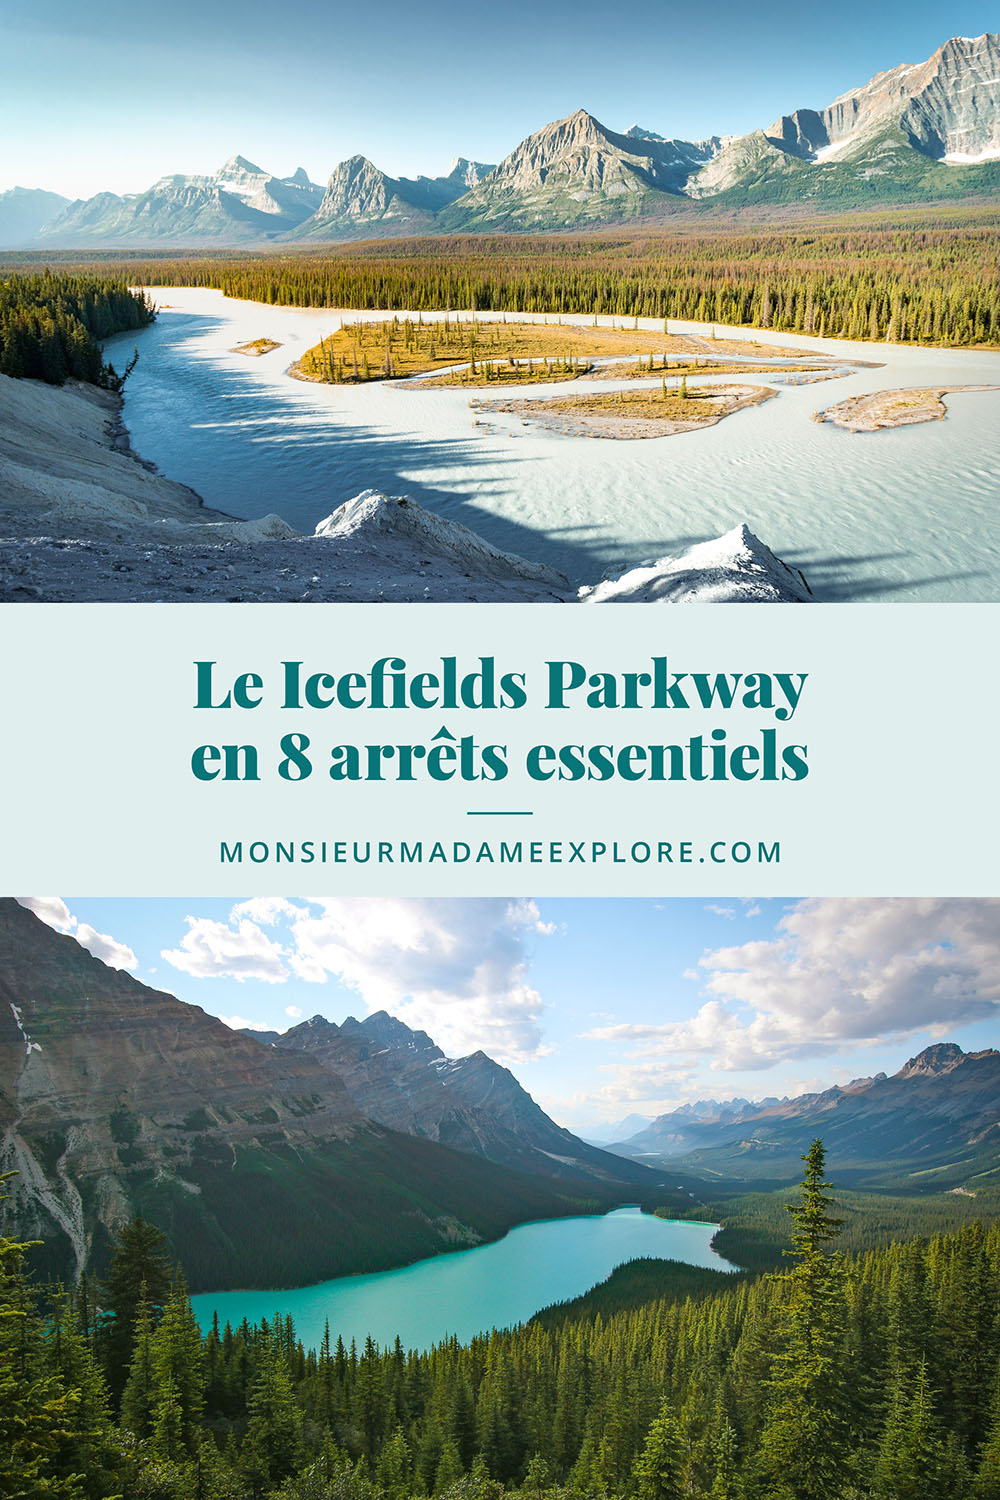 Le Icefields Parkway en 8 arrêts essentiels, Monsieur+Madame Explore, Blogue de voyage, Rocheuses canadiennes, Alberta, Canada / 8 things to see on the Icefield Parkway, Canadian Rockies, Alberta, Canada